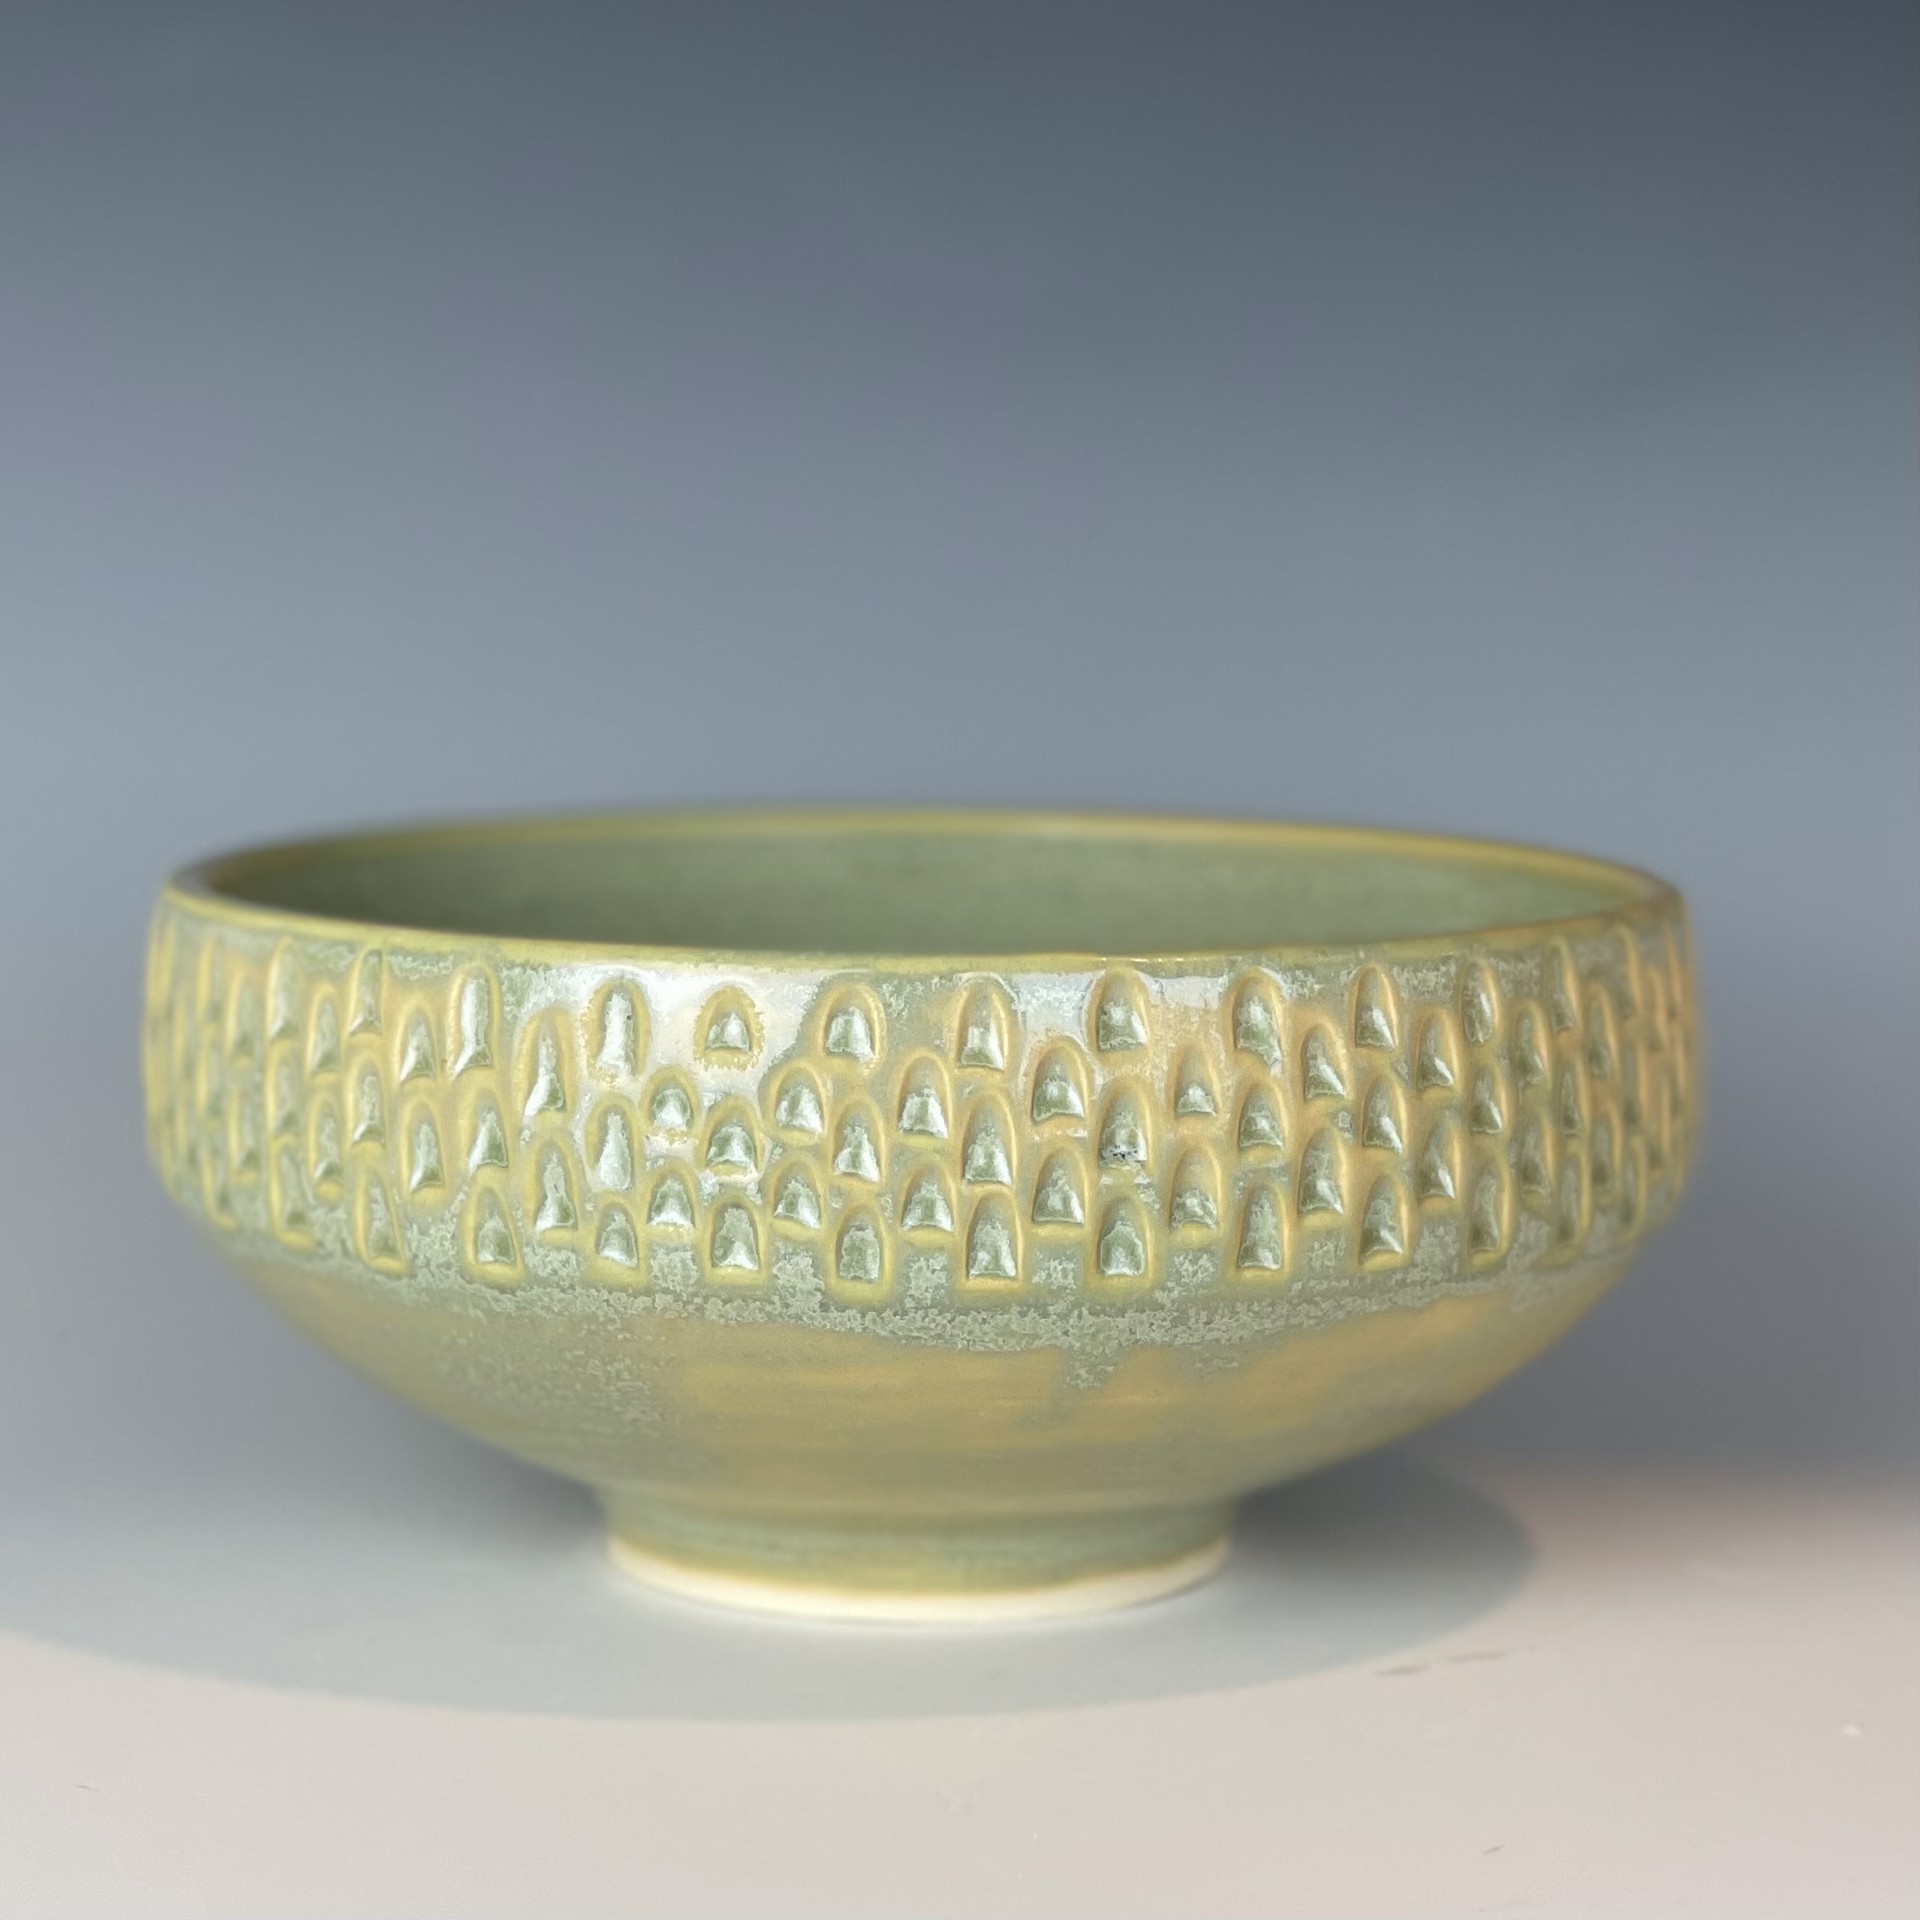 Chiseled Texture Serving Bowl by Mary Roberts